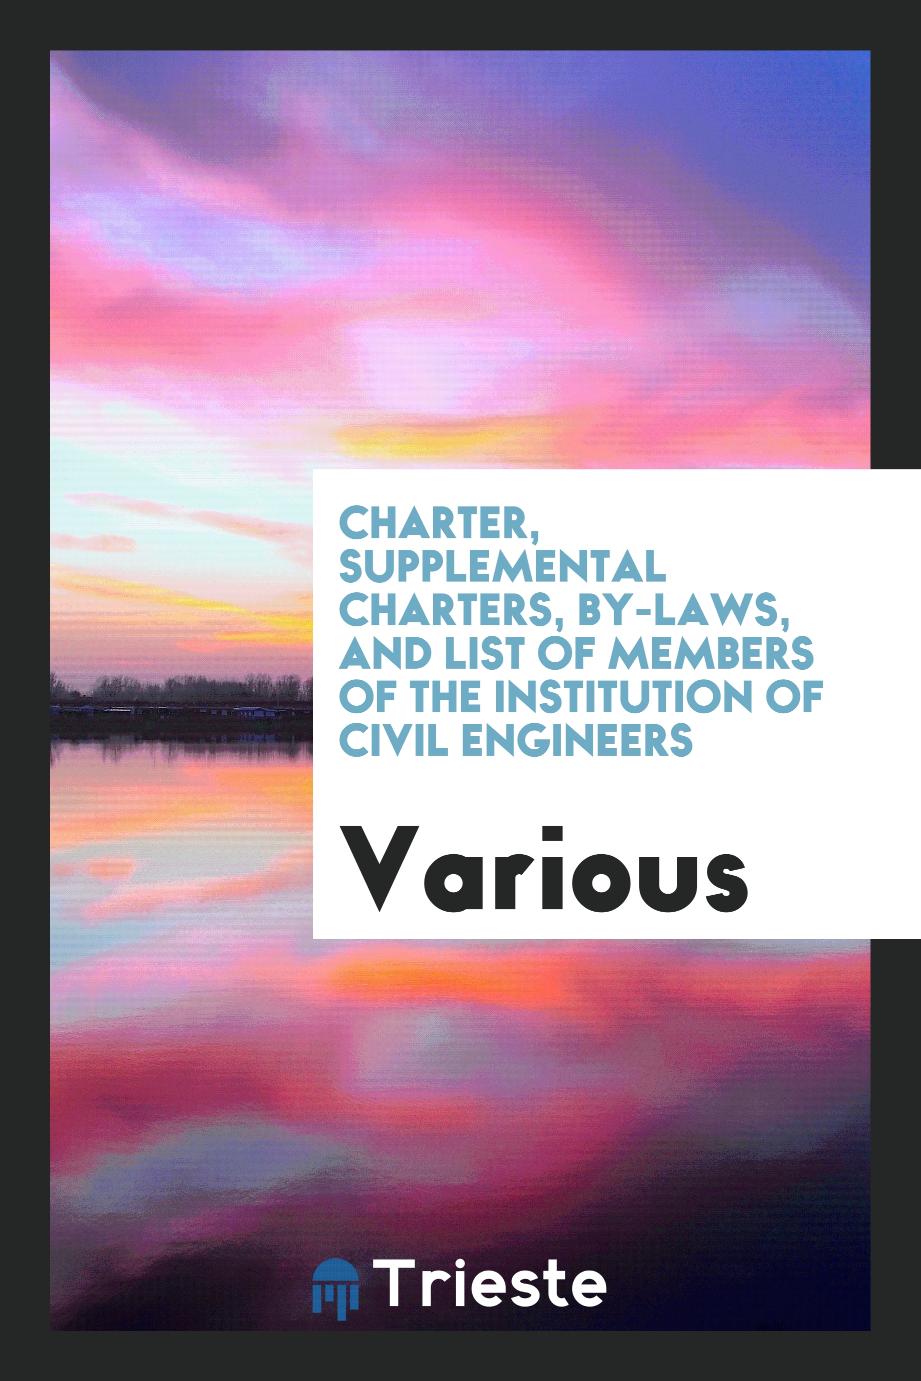 Charter, Supplemental Charters, by-Laws, and List of Members of the Institution of Civil Engineers